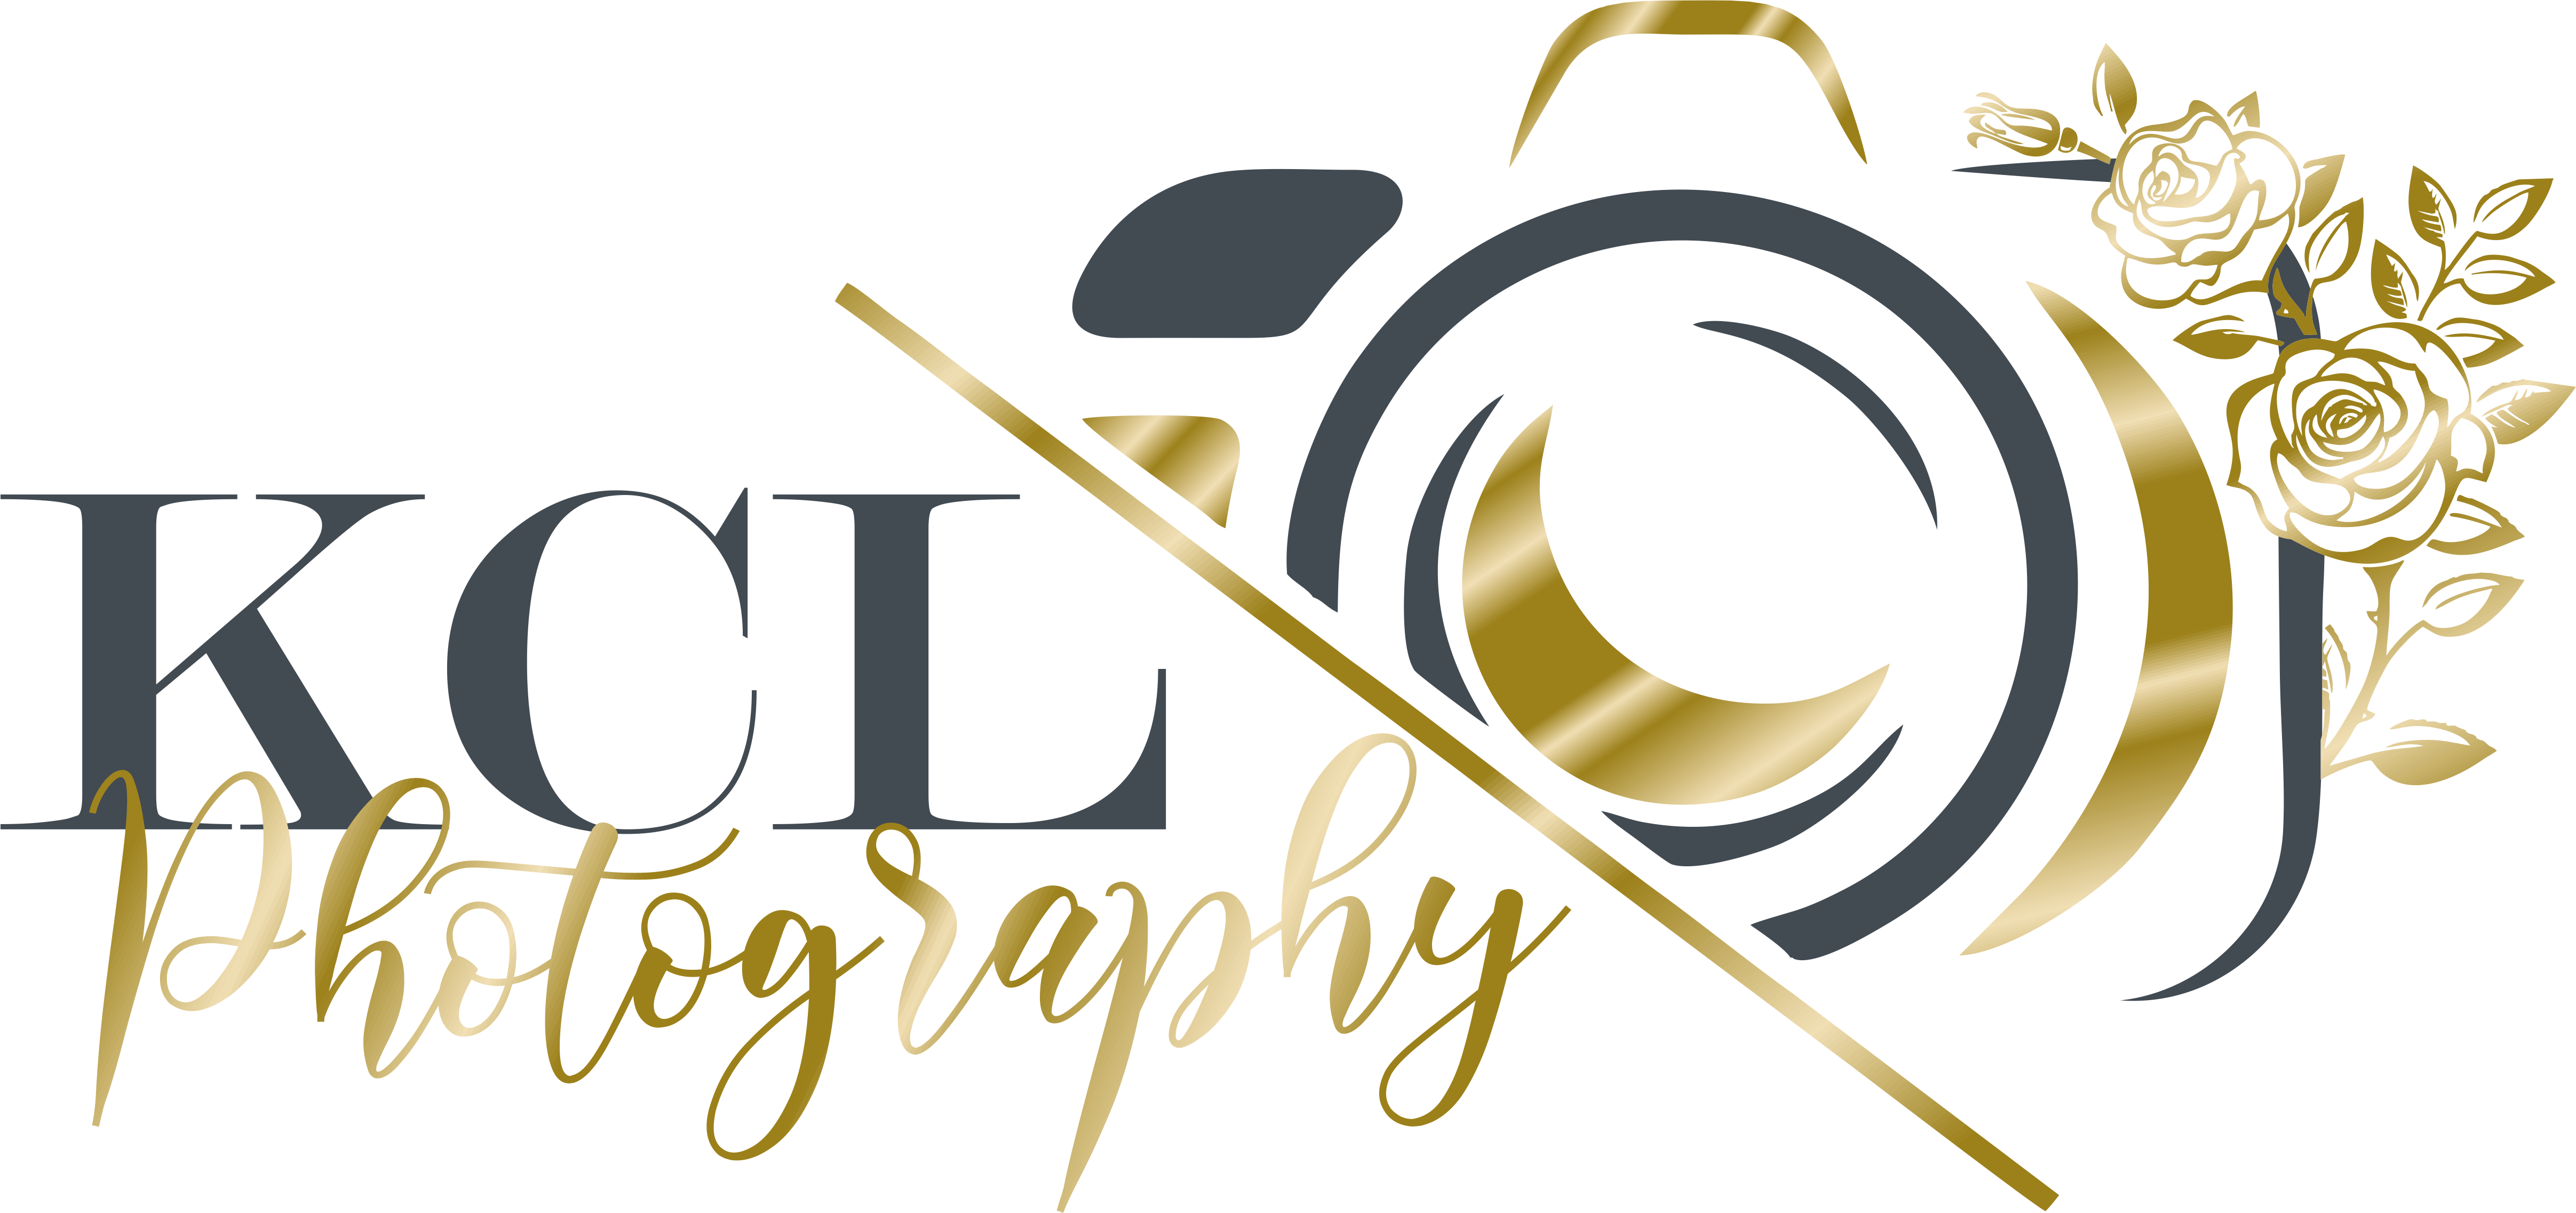 Kcl-Photography